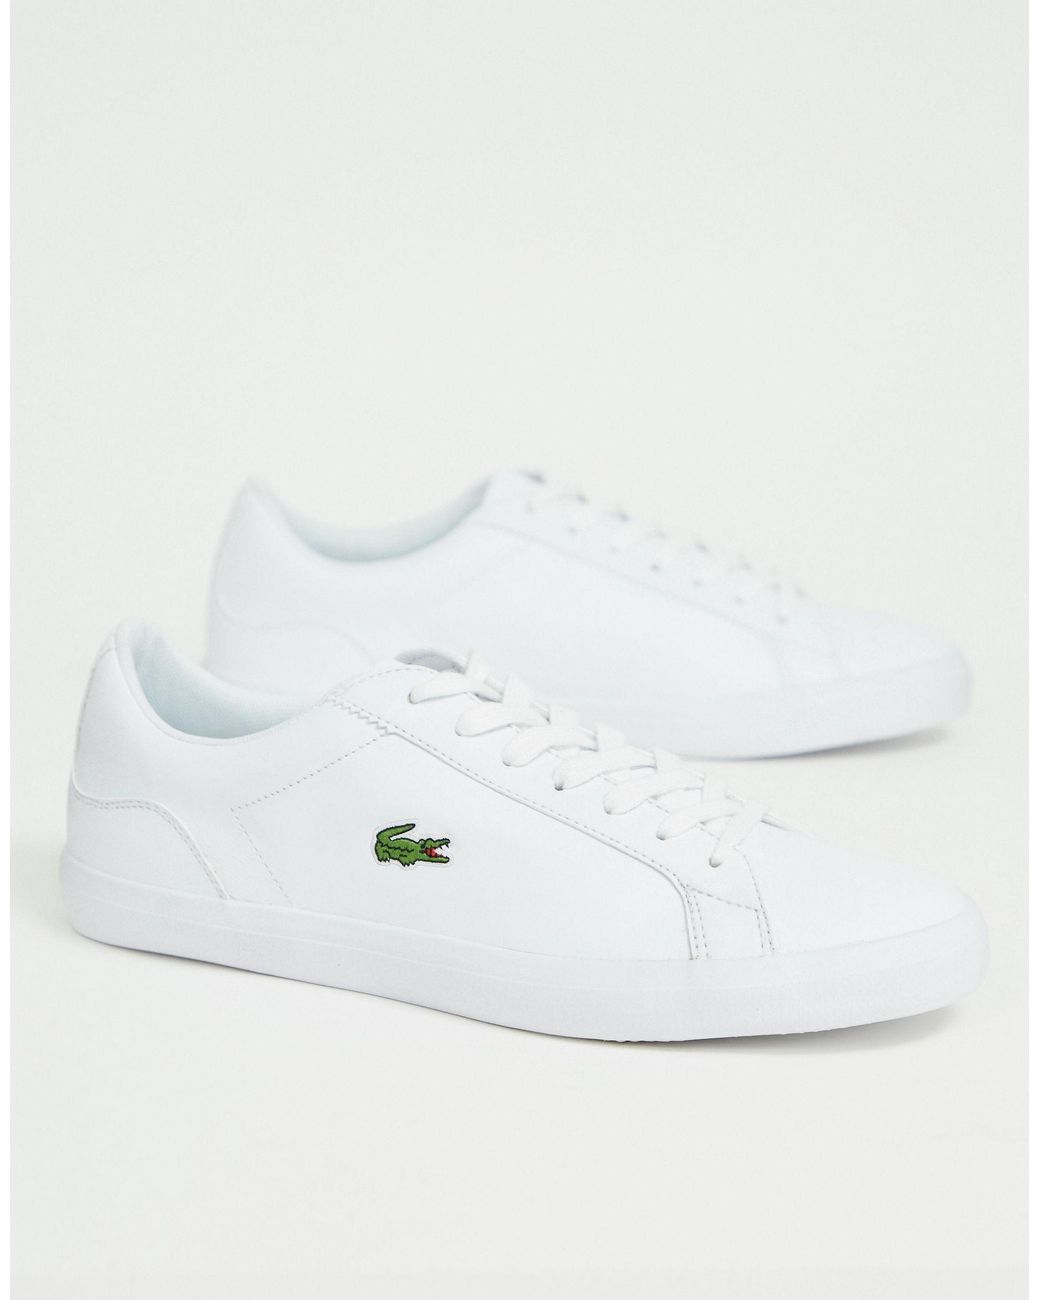 Lacoste Lerond Bl 1 Trainers in White 